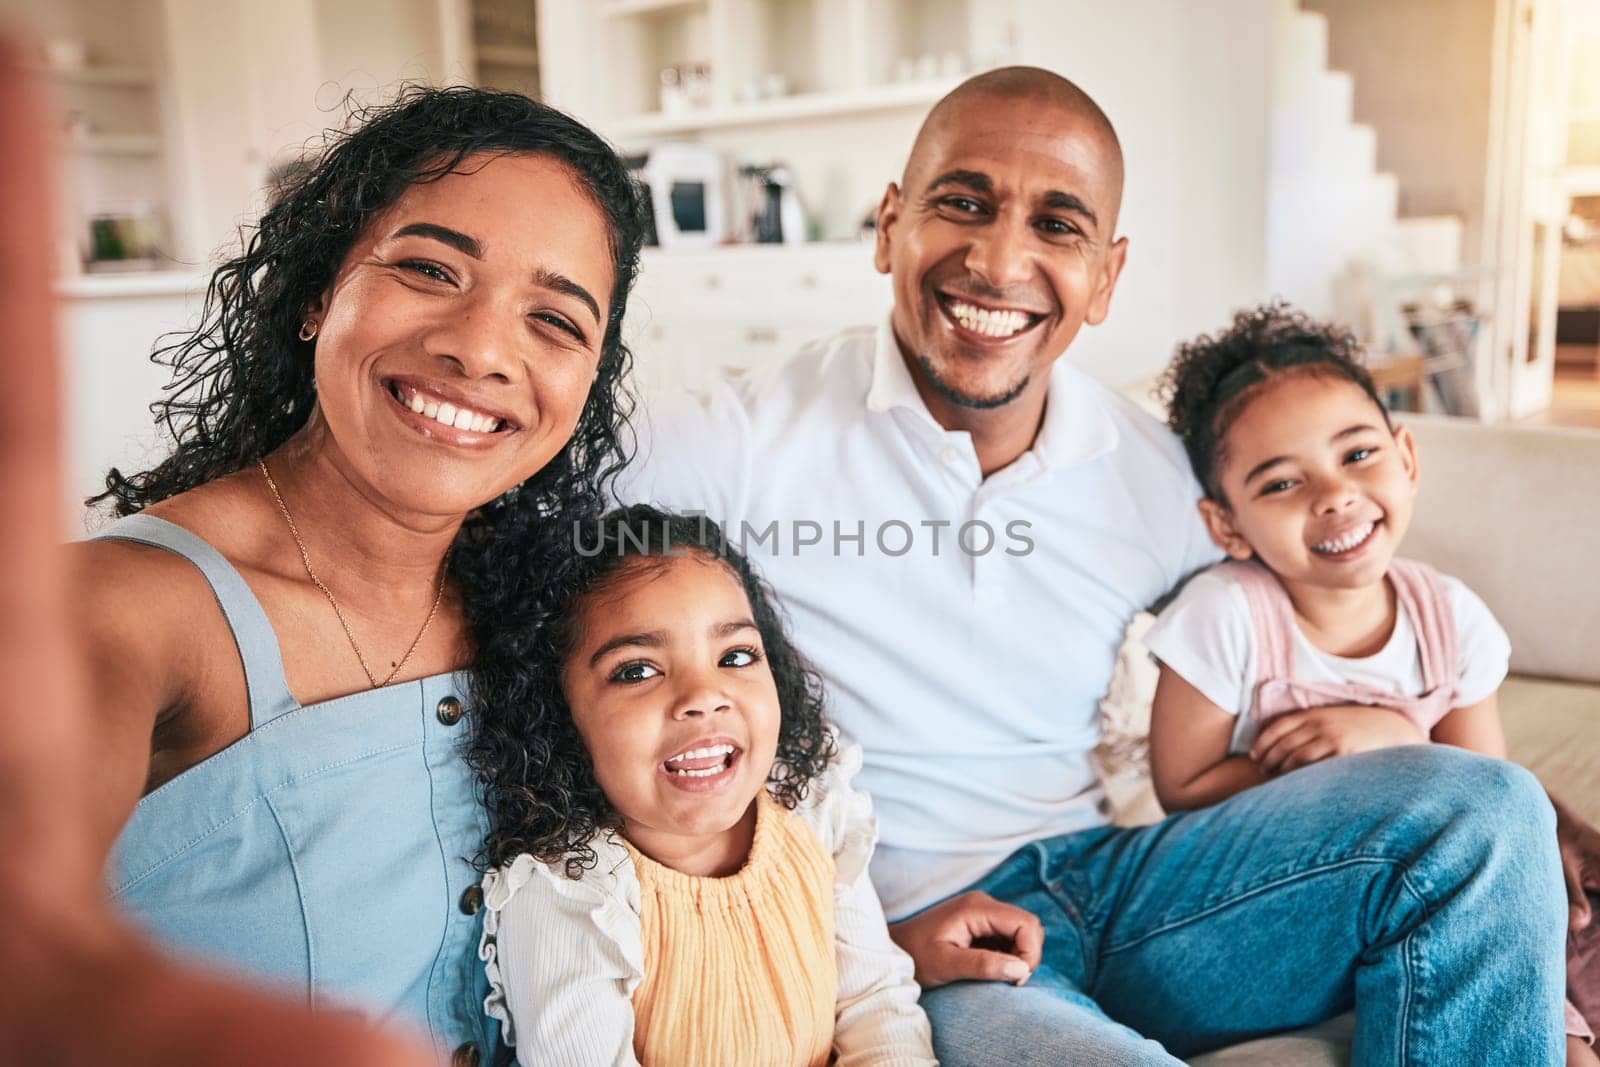 Happy family, portrait and smile for selfie, photo or profile picture on a sofa in their home. Love, face and photograph pf children with parents in a living room, excited and bonding on the weekend.